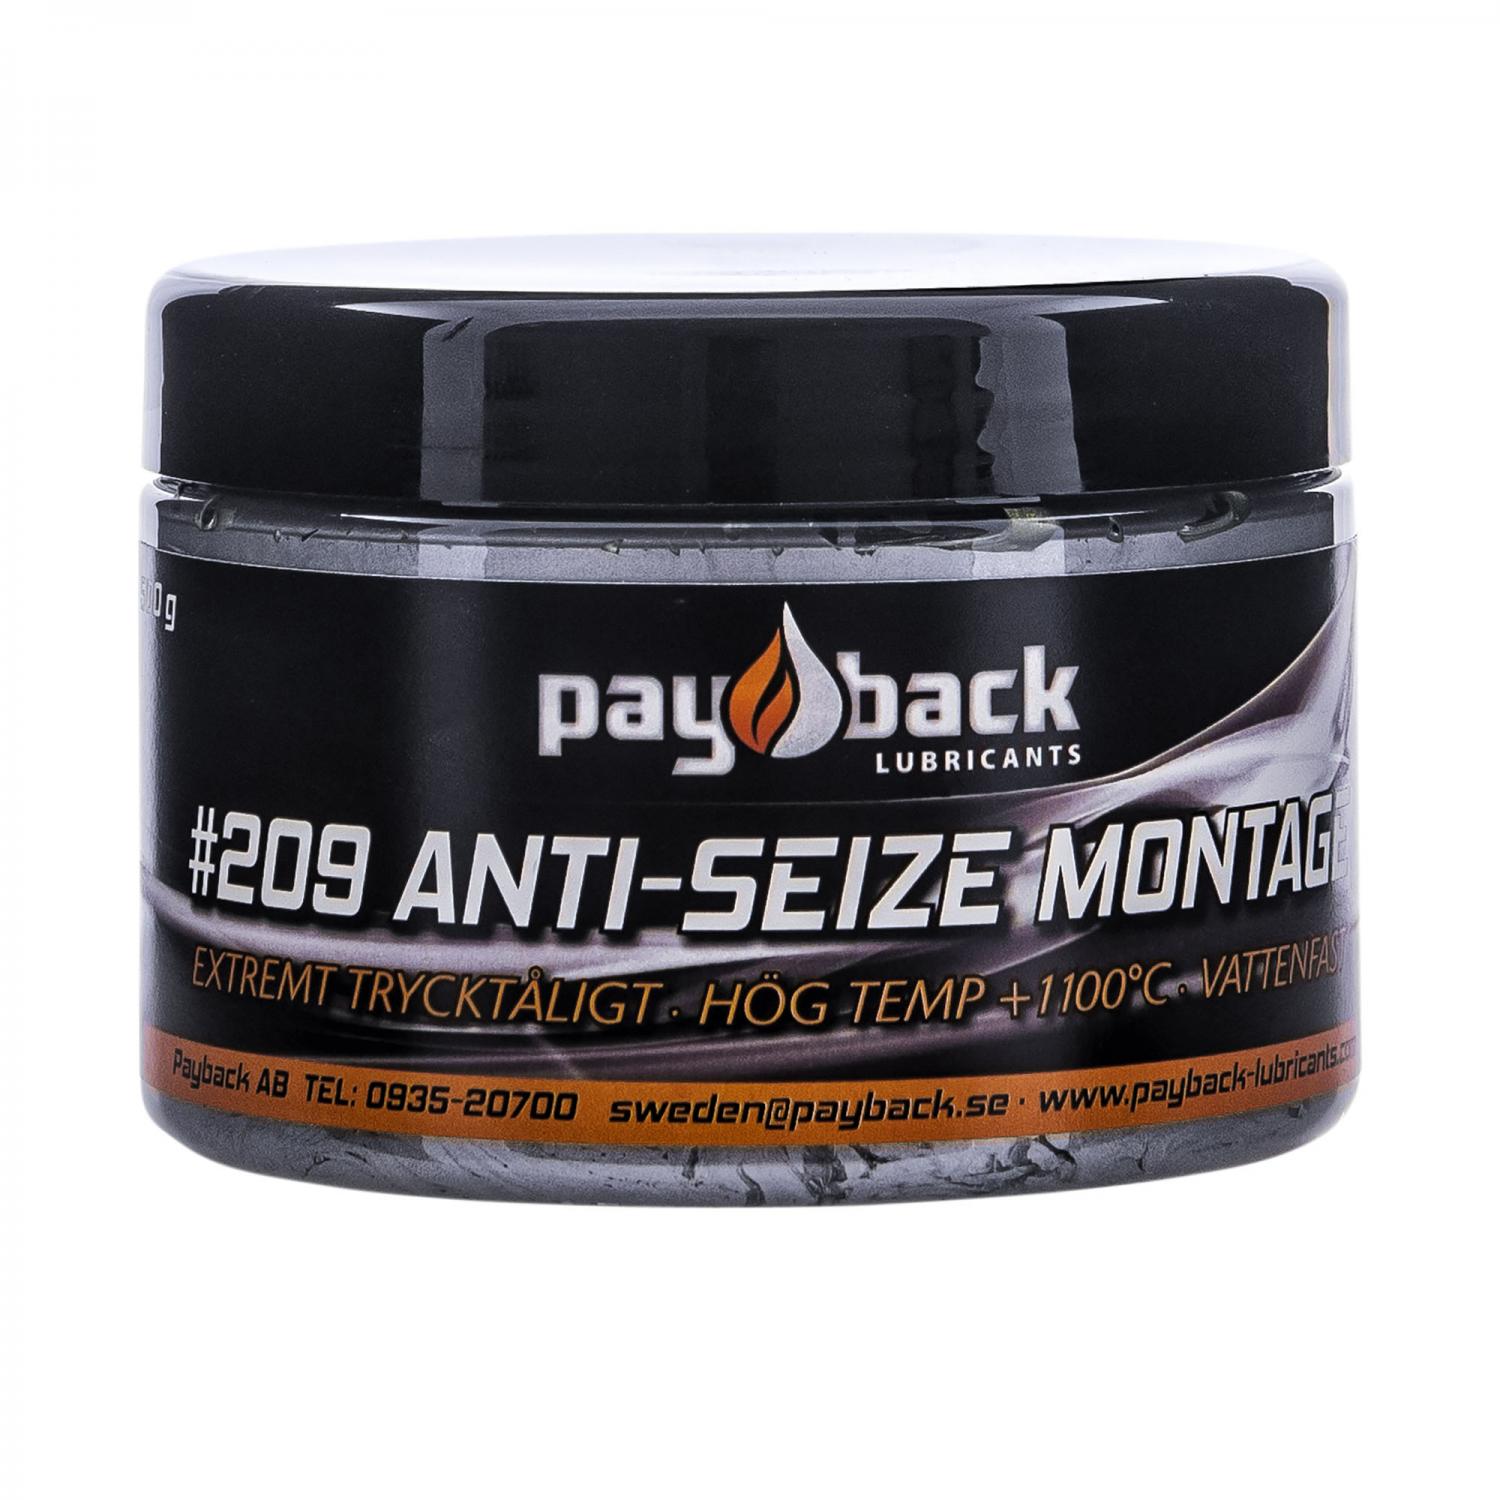 Payback #209 Anti-Size Montage "Montagepasta" 500g